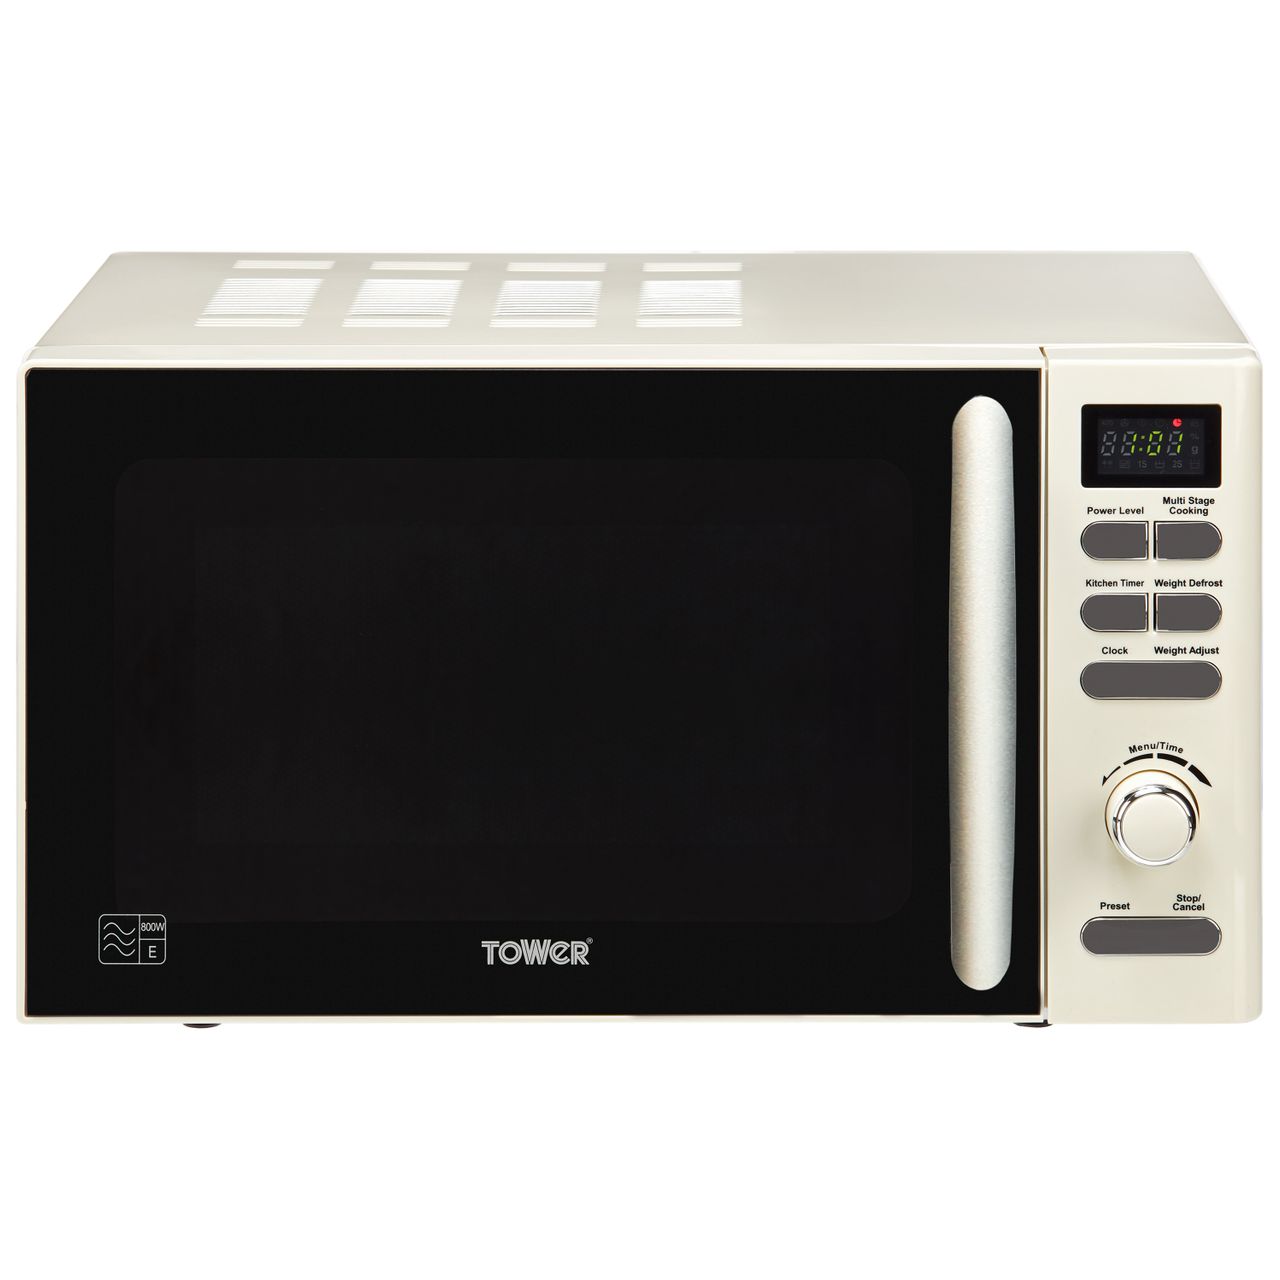 Tower T24019C 20 Litre Microwave Review